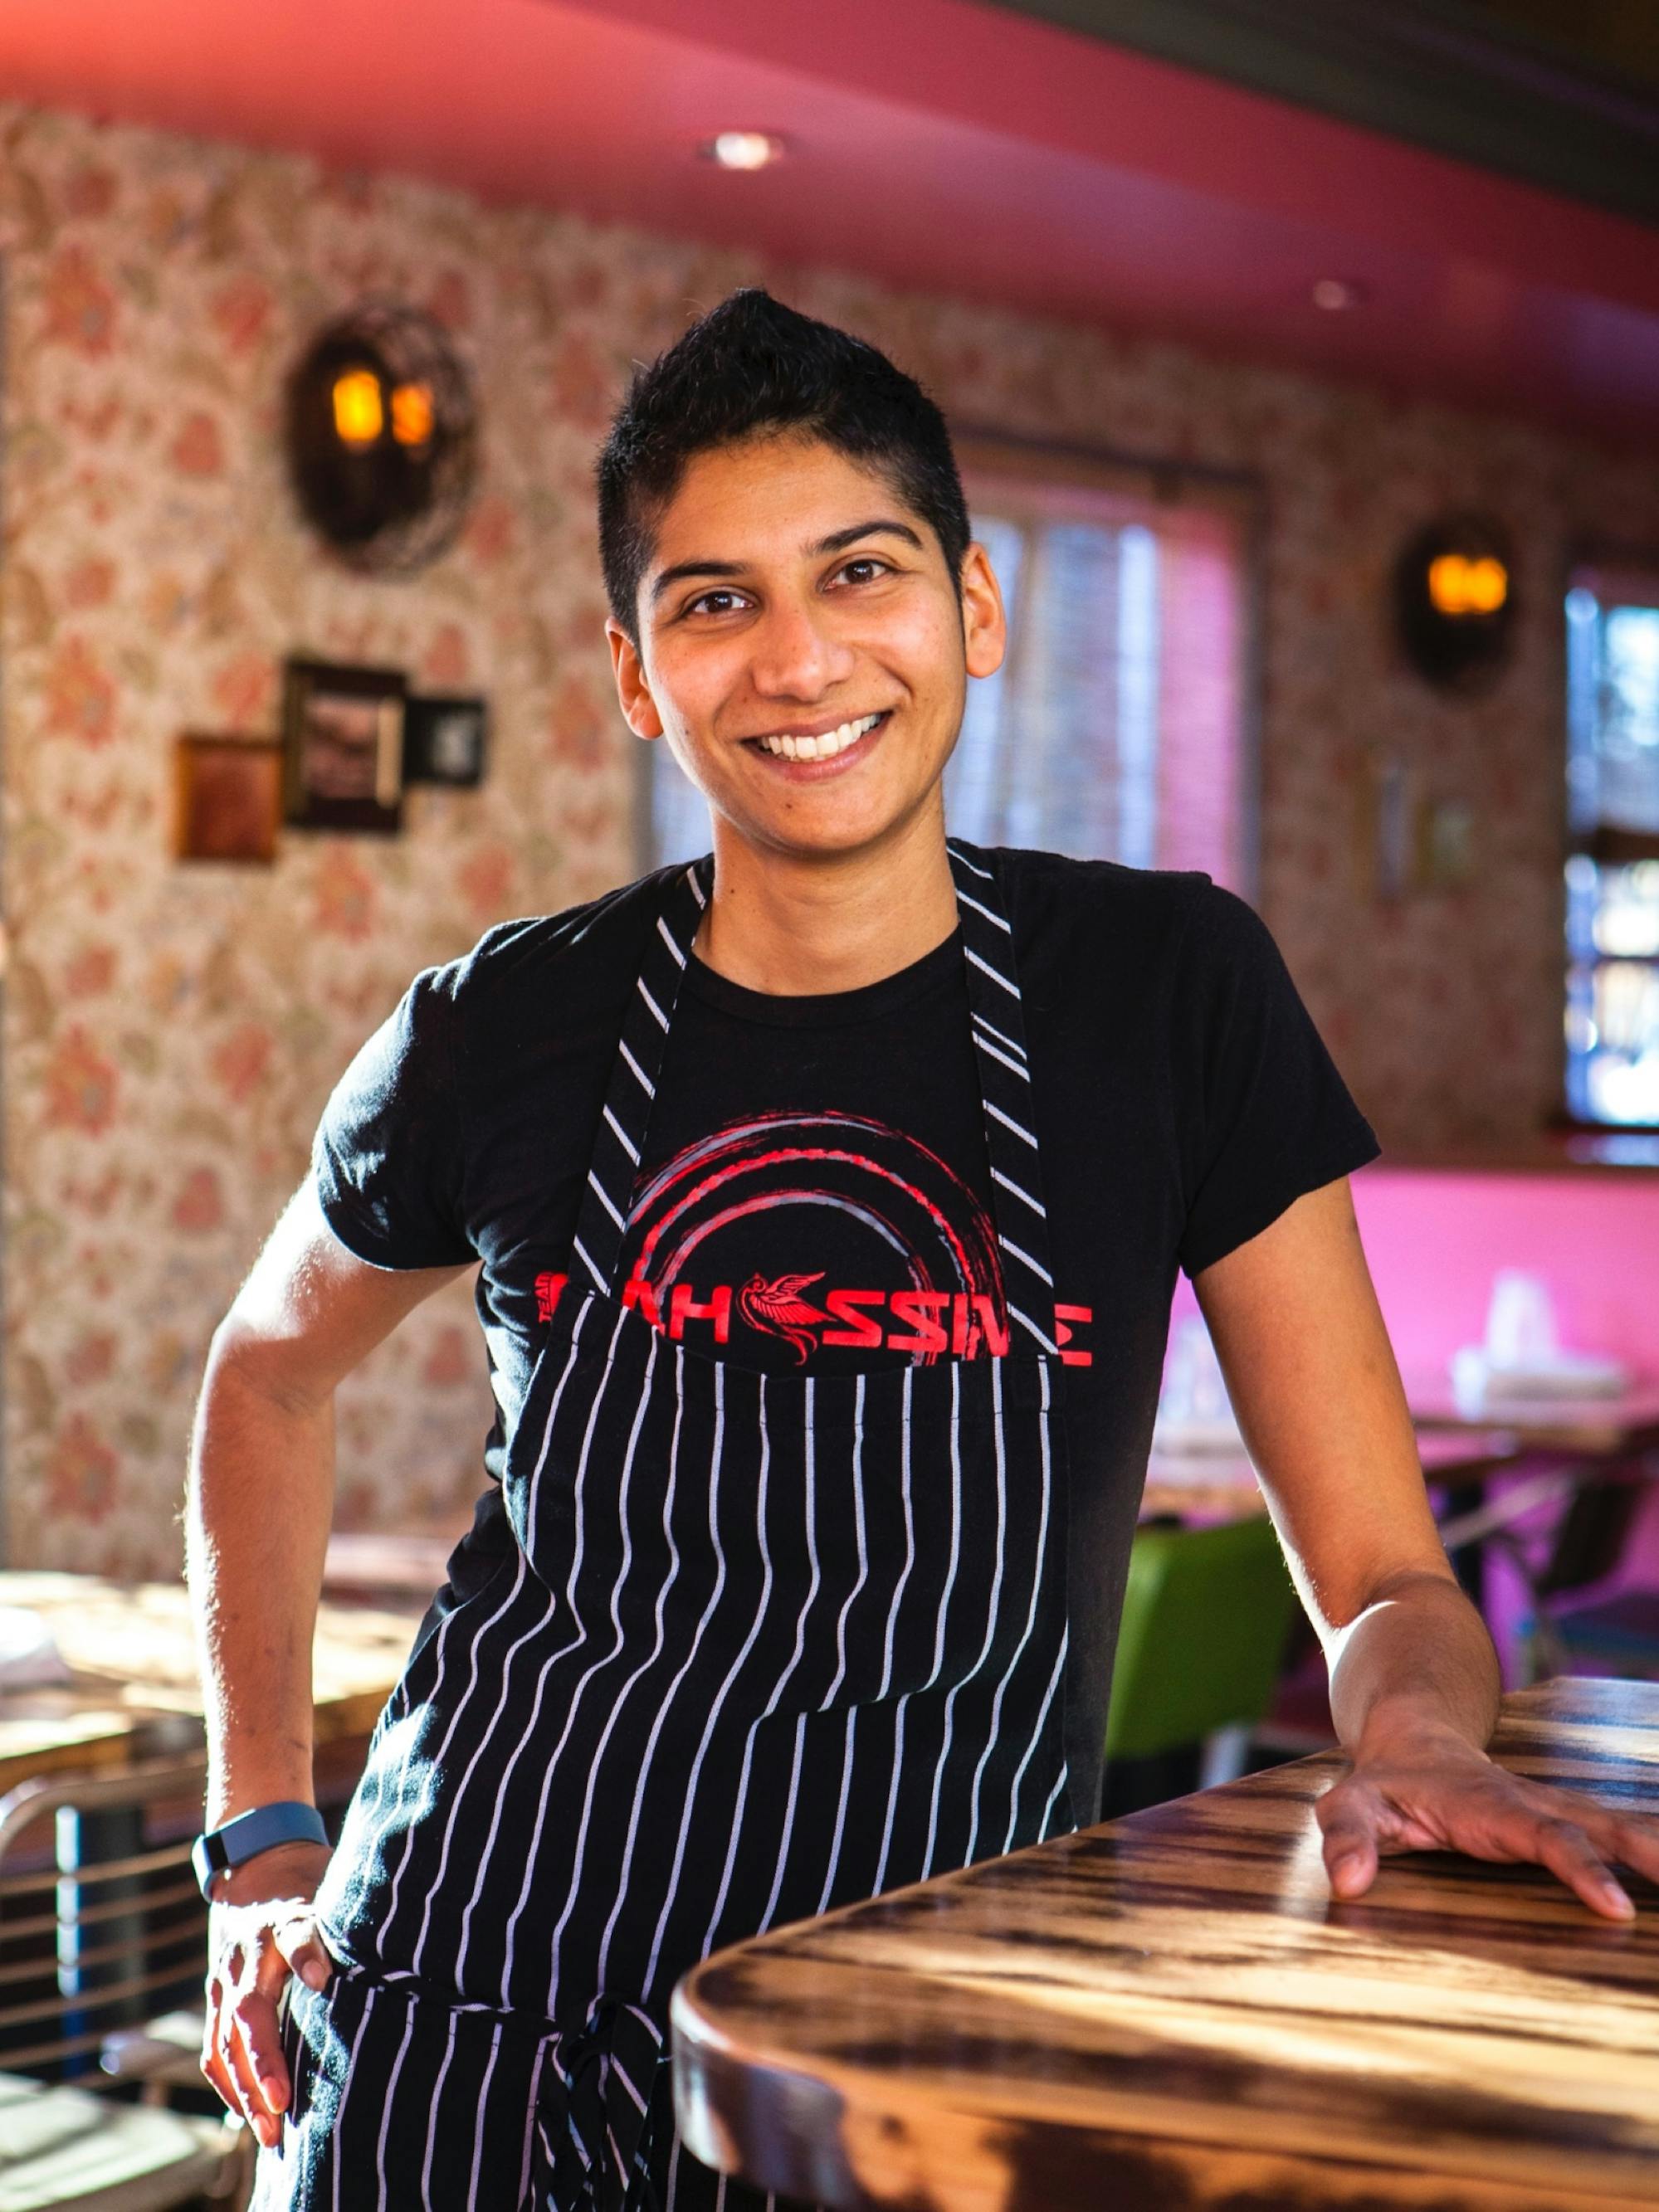 Mistry at their Oakland restaurant, Juhu Beach Club. They’re smiling and leaning on a wood counter. They’re wearing a striped apron and black T-shirt with a red graphic. The restaurant features bright natural light, an exposed brick wall, and cheerful pink paint.